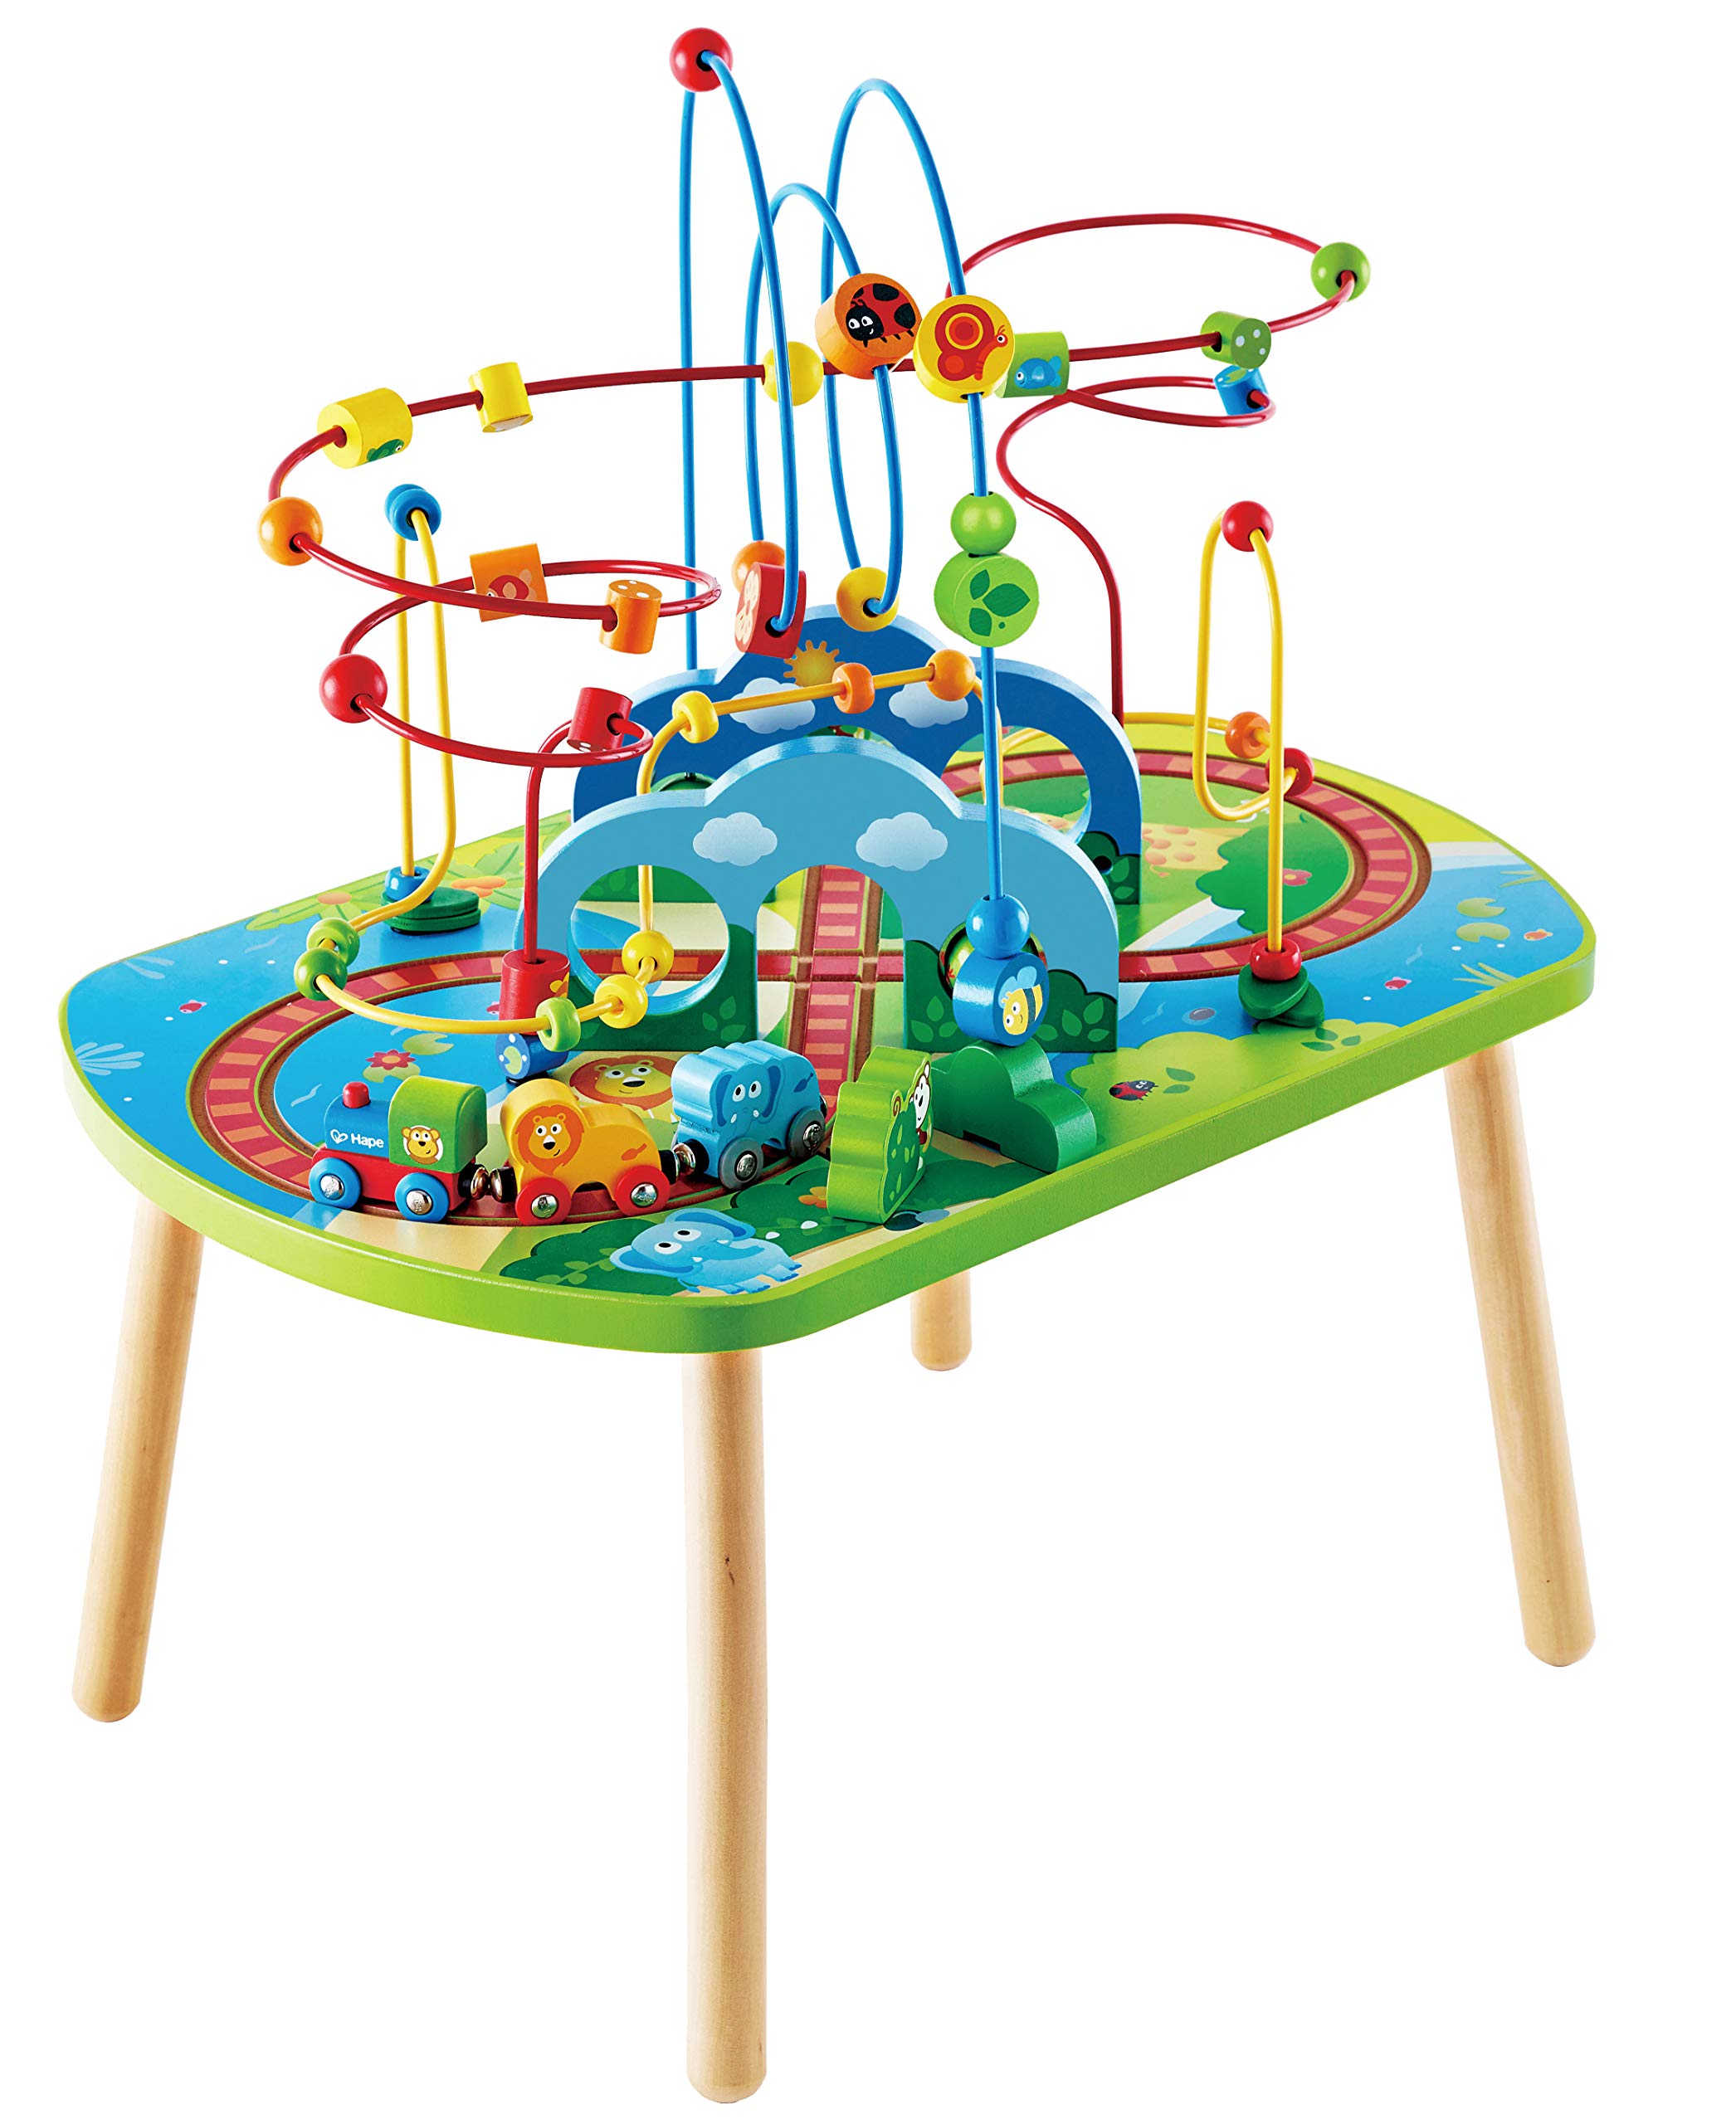 Hape E3824 Jungle Adventure Kids Toddler Wooden Bead Maze & Railway Train Track Play Table Toy for Ages 18 Months and Up Multicolor, 25.6